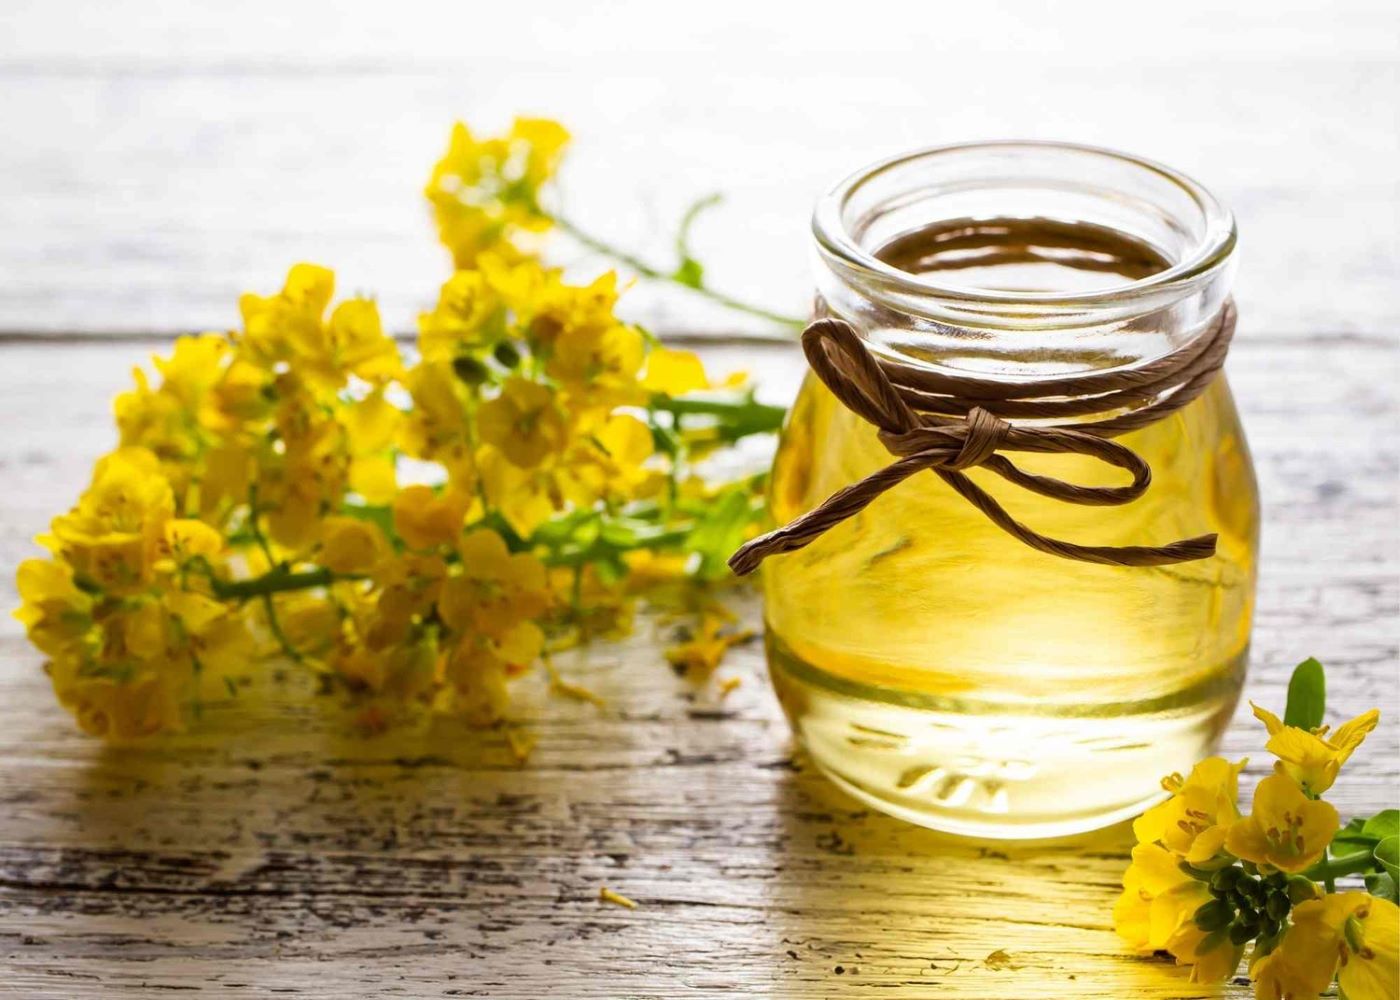 Jar of canola oil next to a rapeseed plant